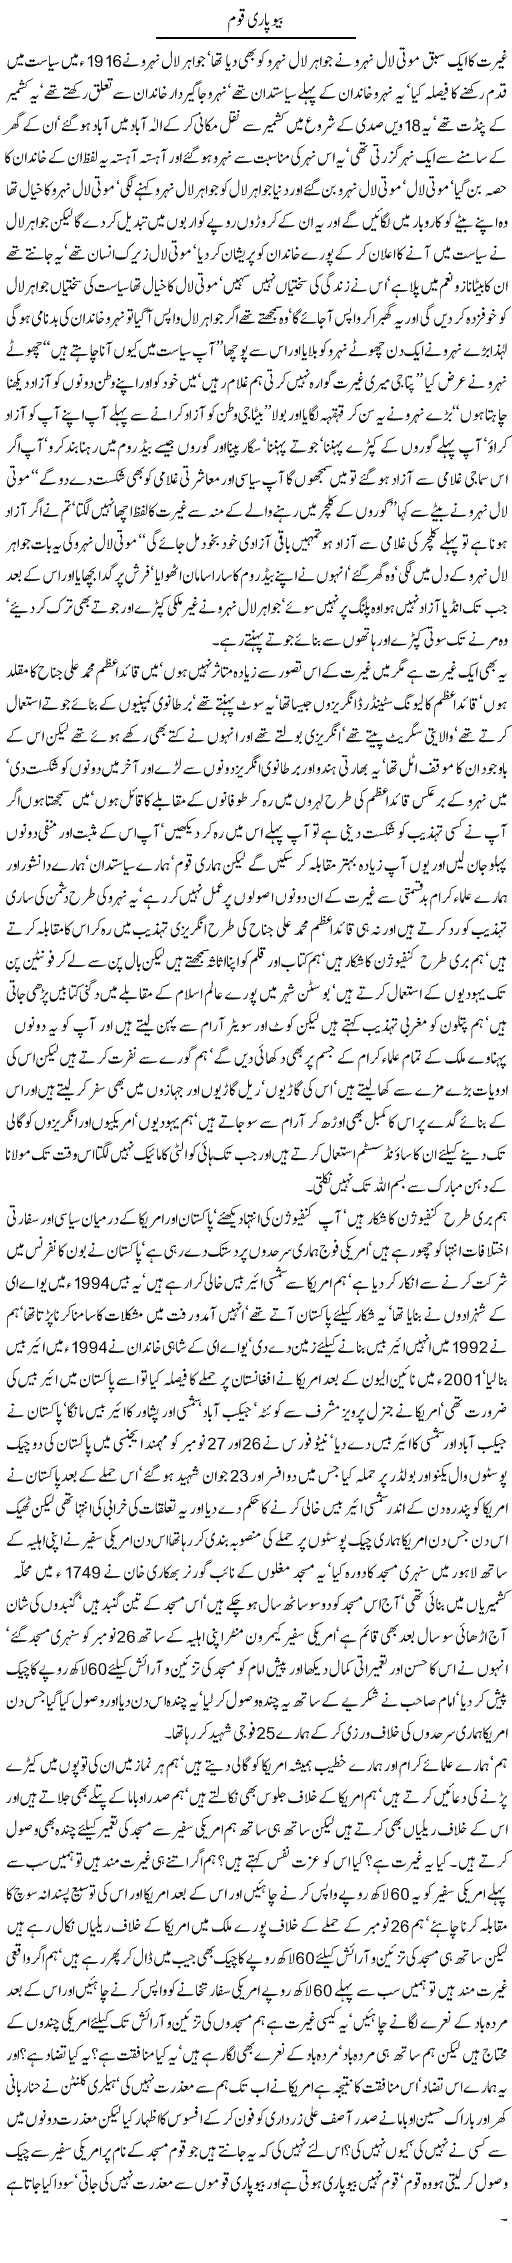 Nehru and America Express Column Javed Chaudhry 7 December 2011